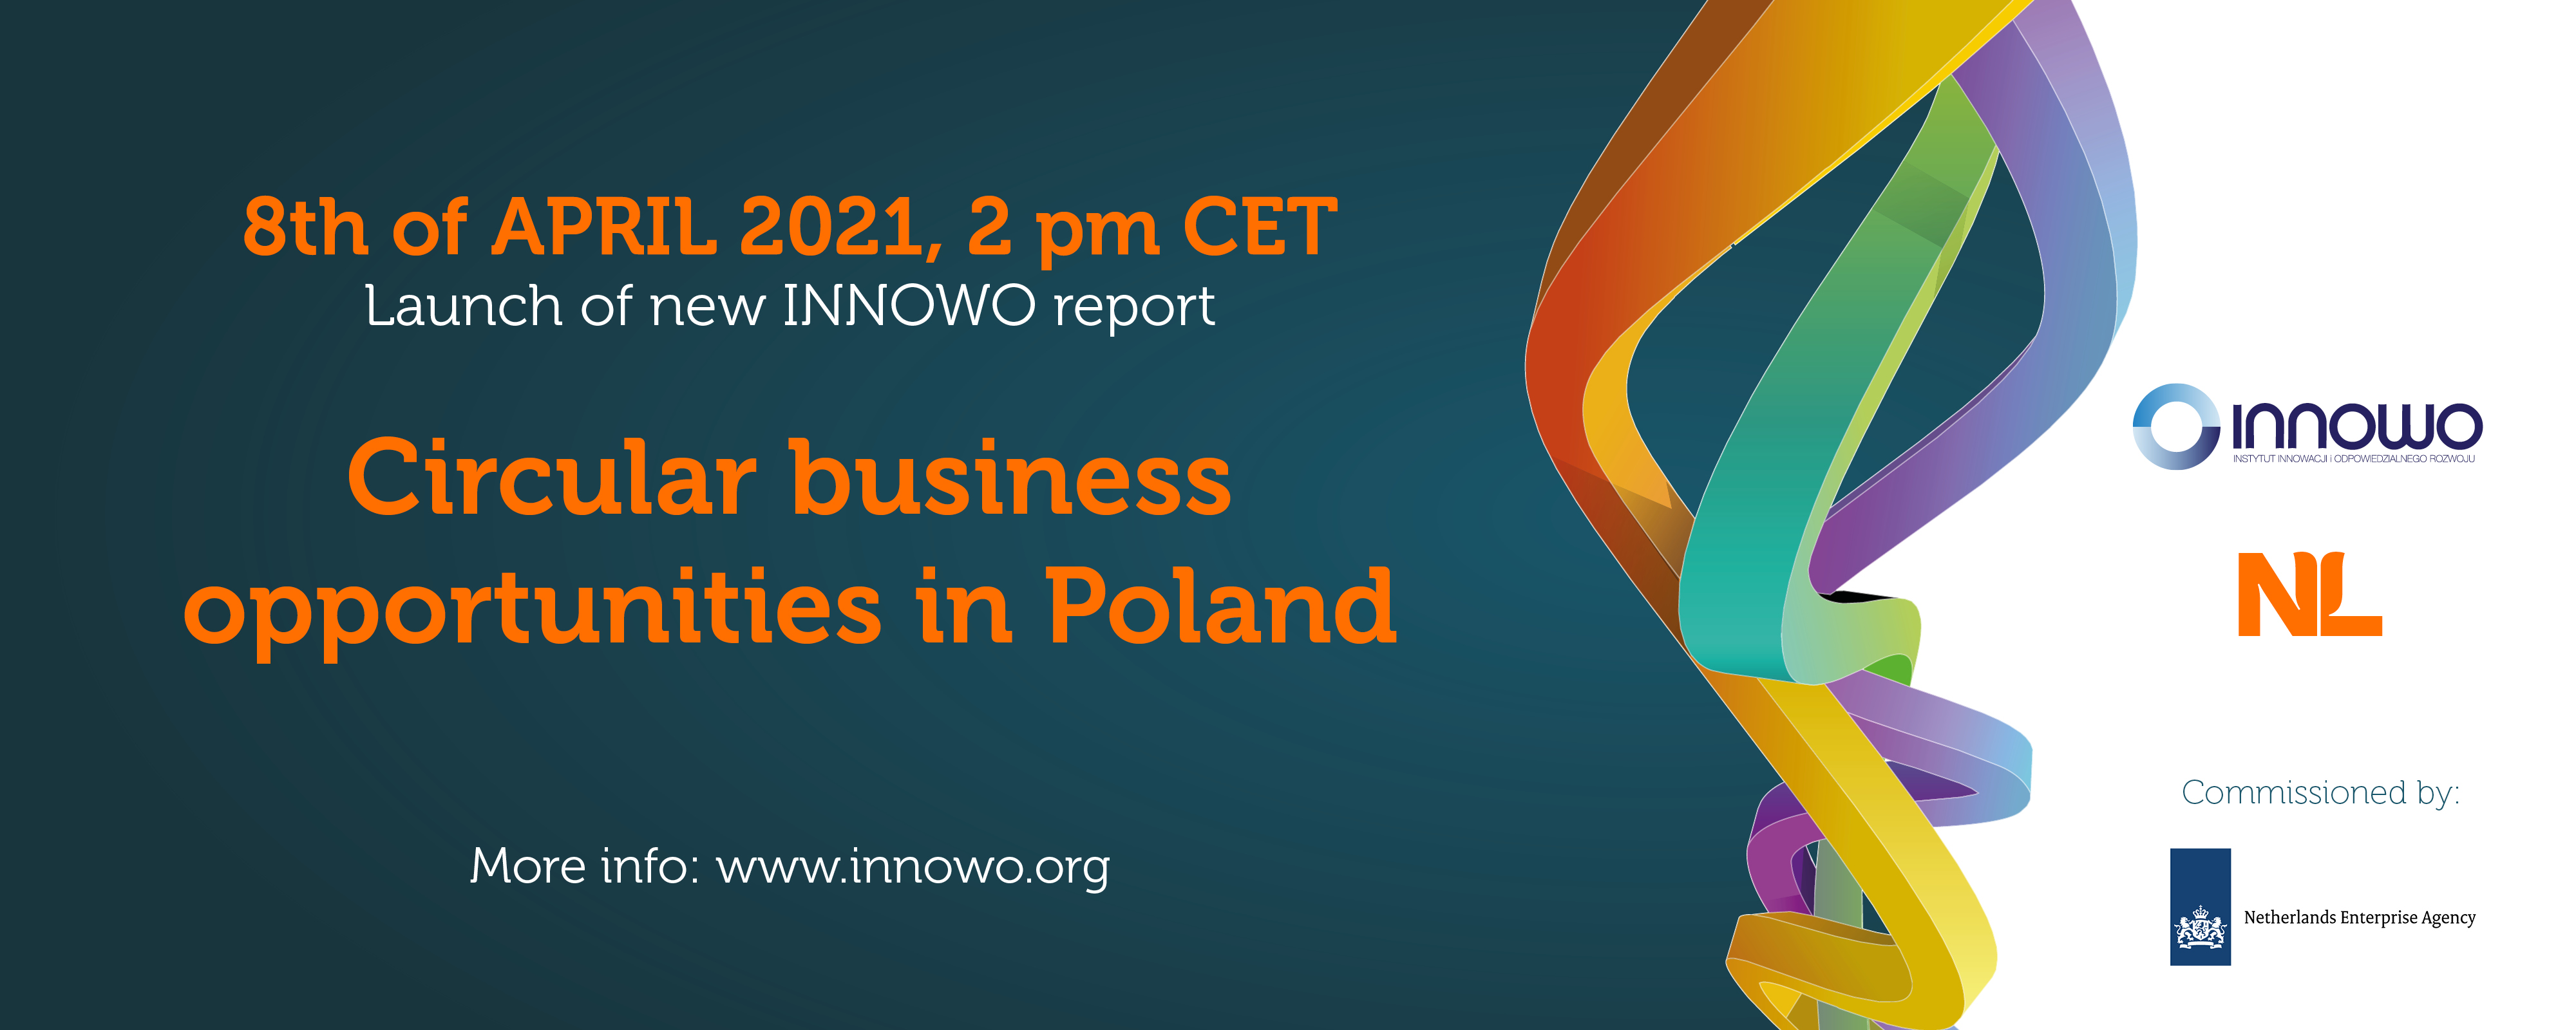 Circular business opportunities in Poland